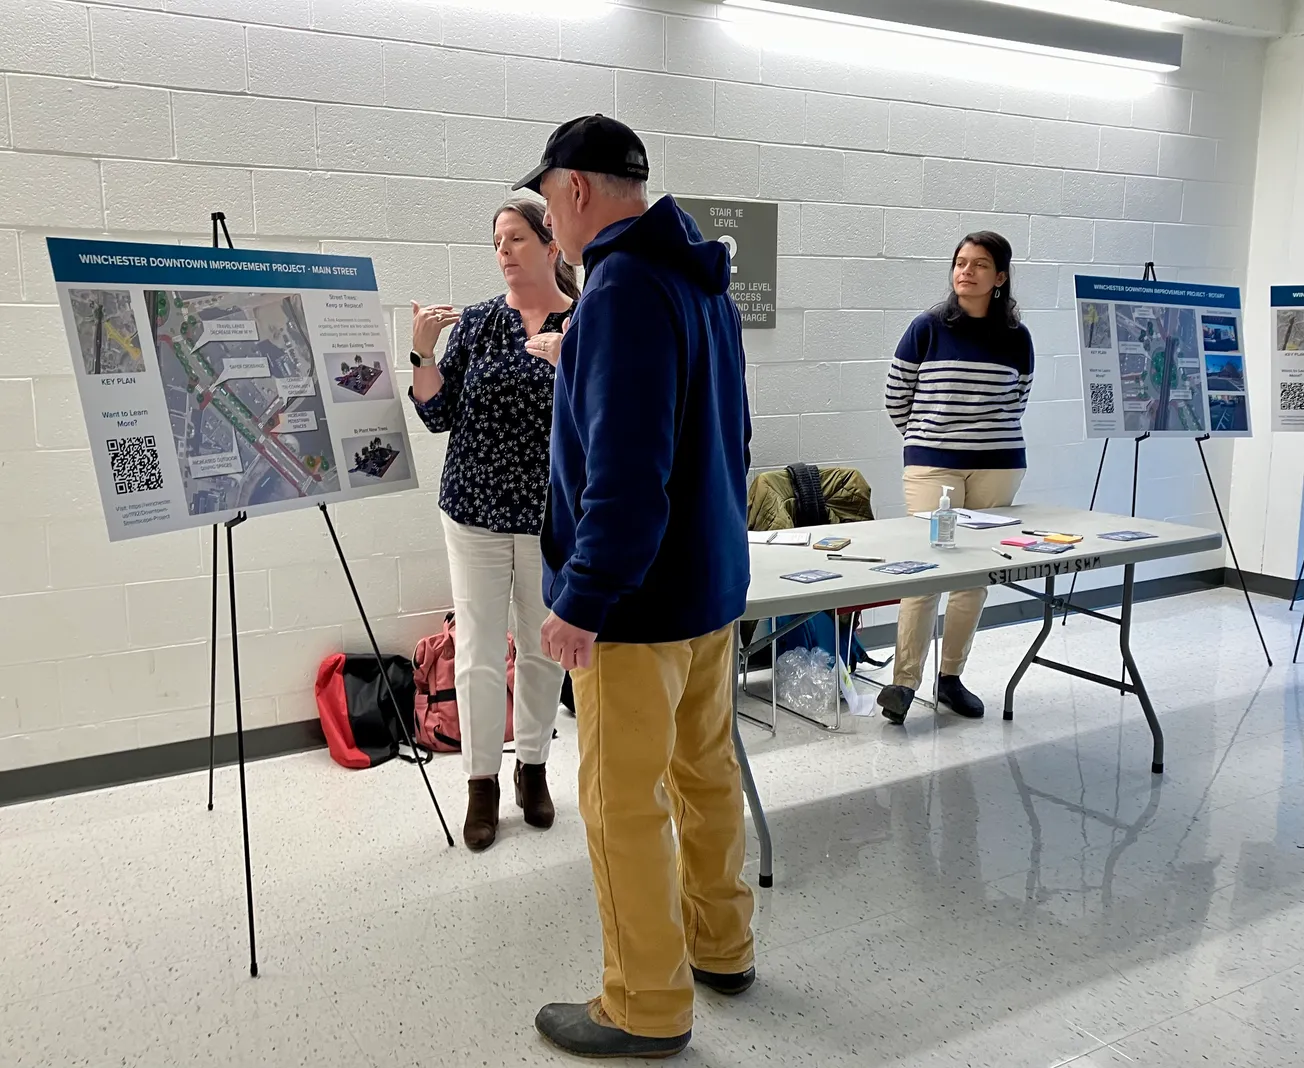 Residents get first look at downtown improvement project